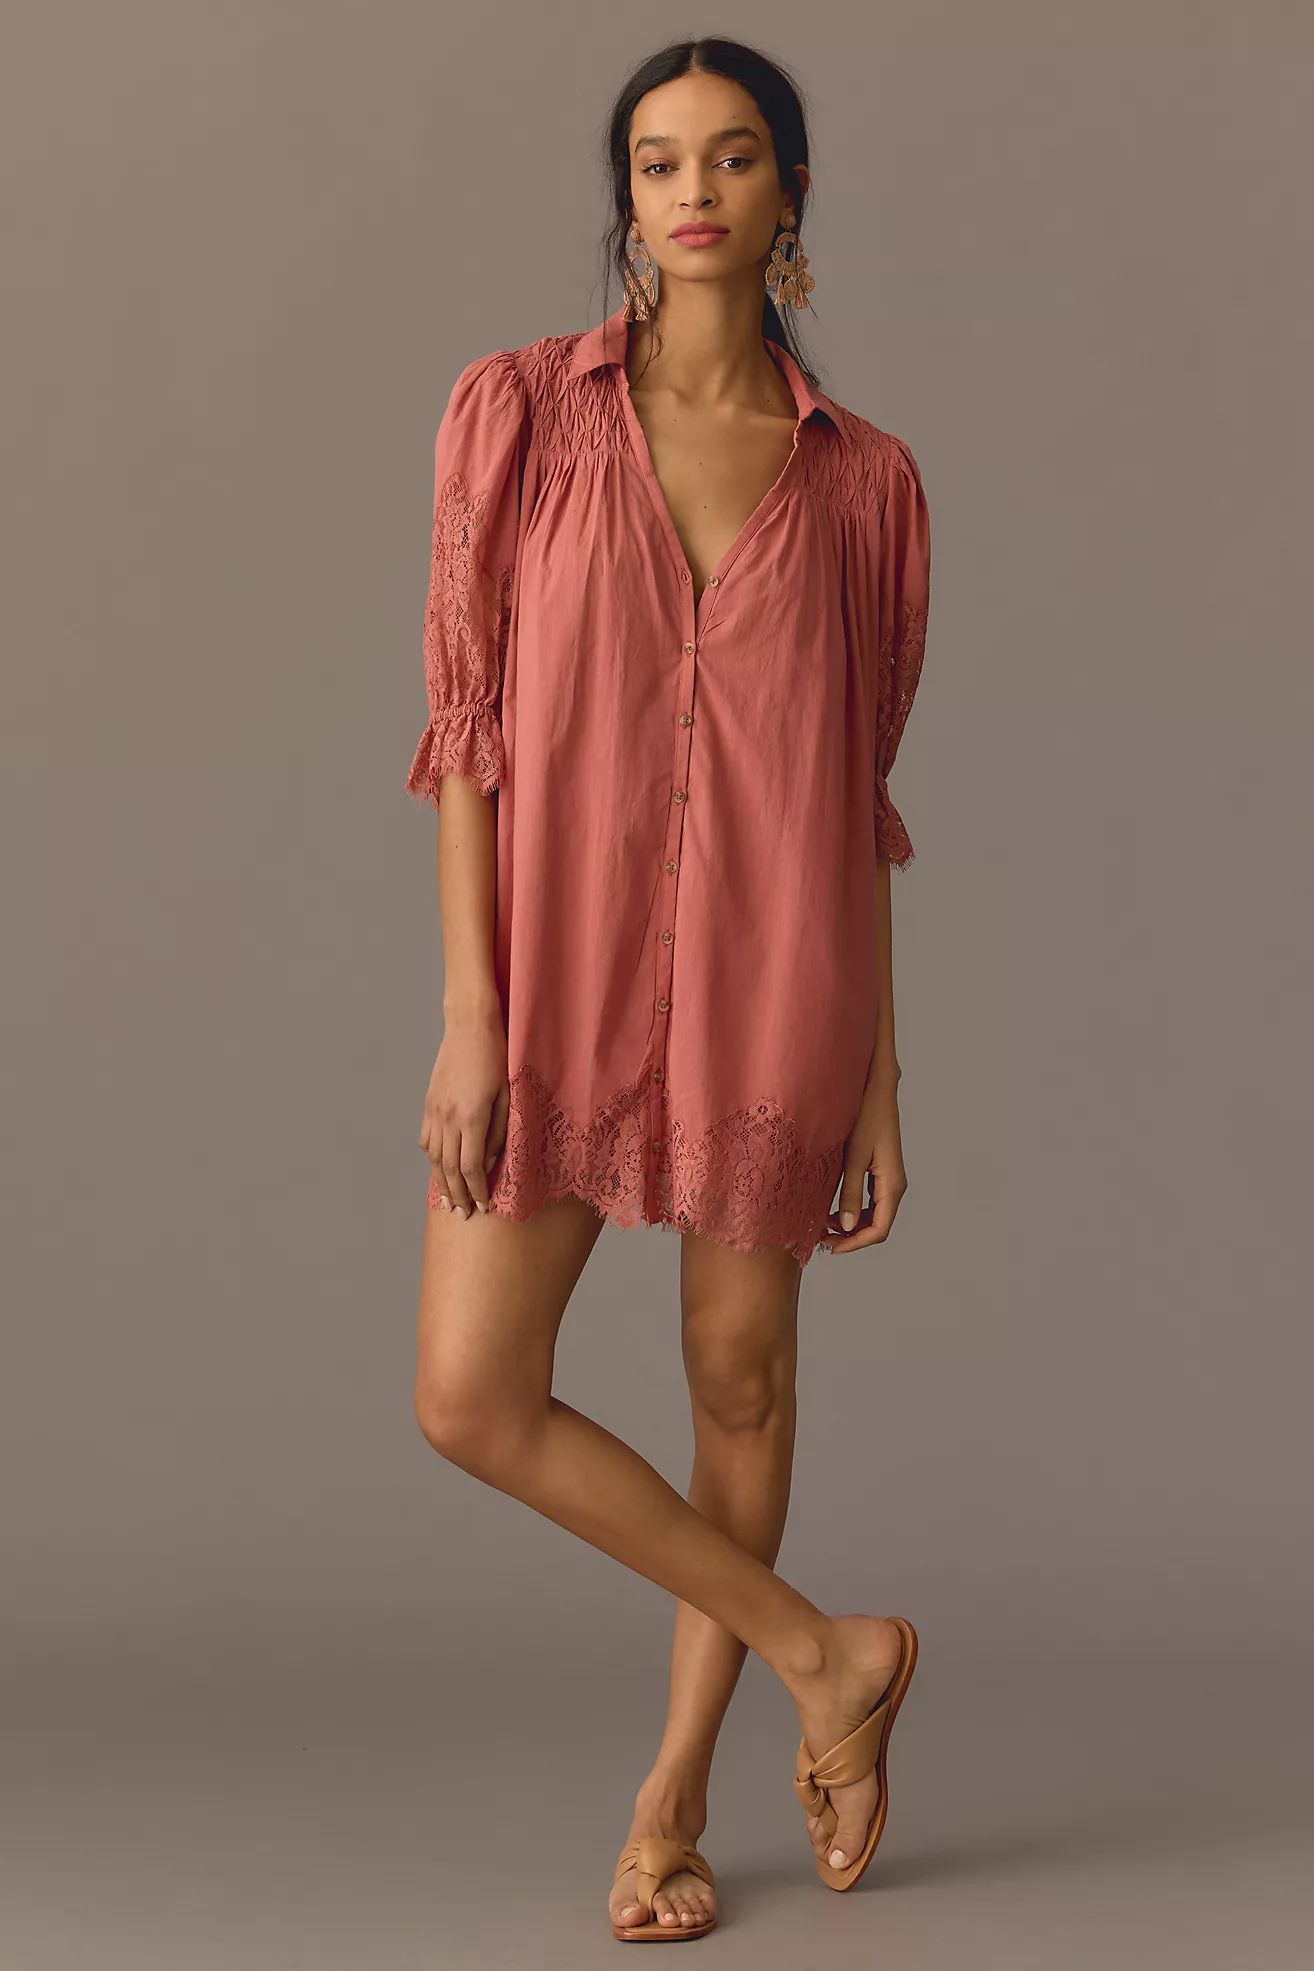 By Anthropologie Lace Tunic Dress | Anthropologie (US)